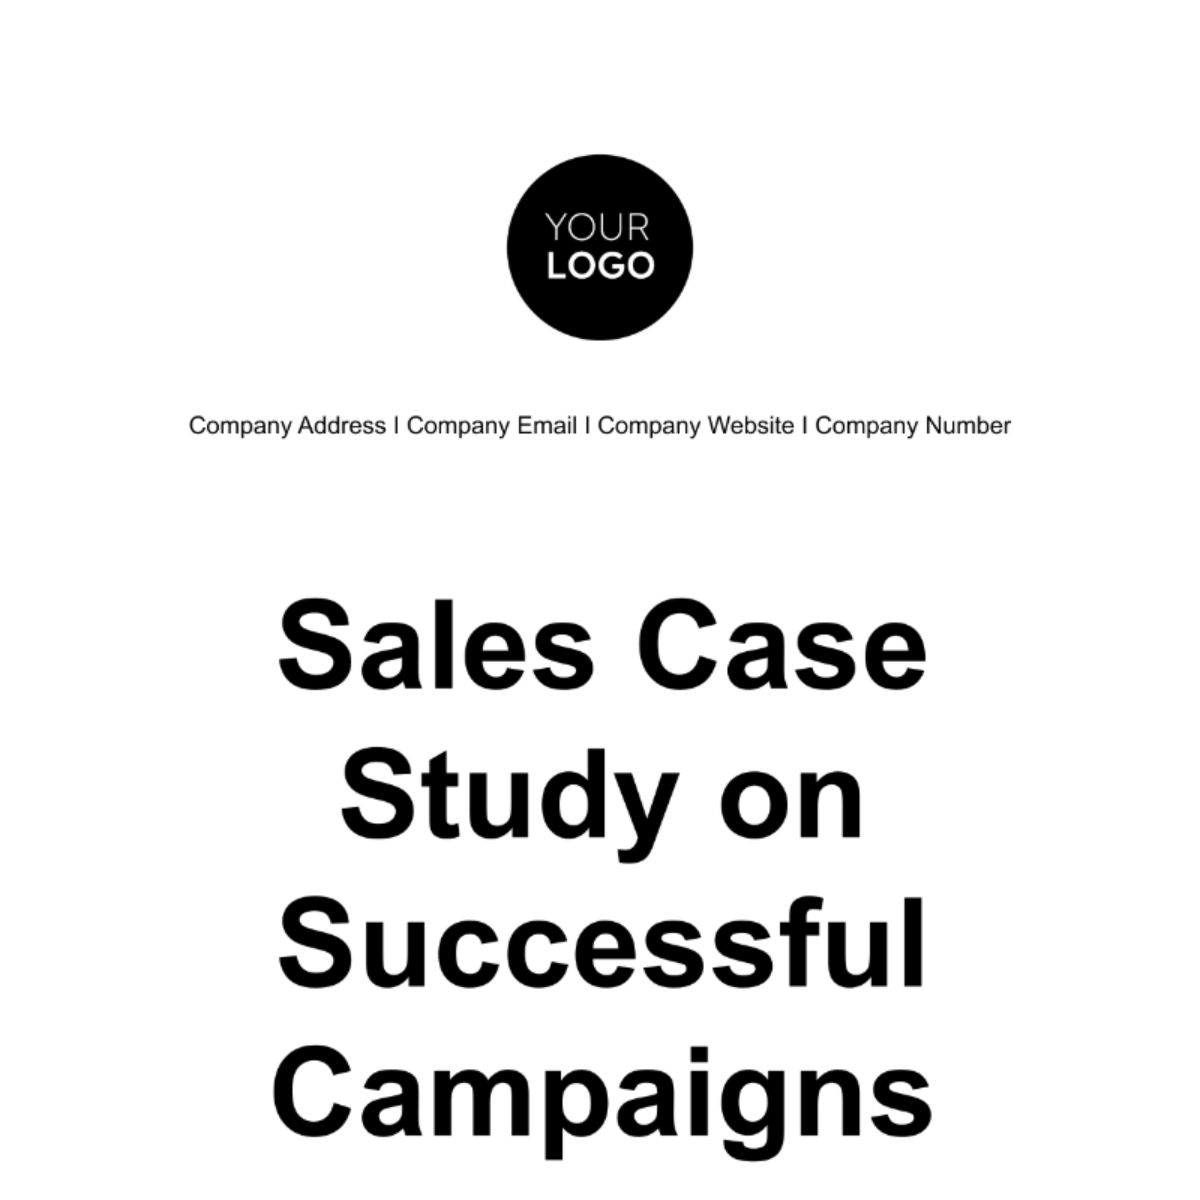 Sales Case Study on Successful Campaigns Template